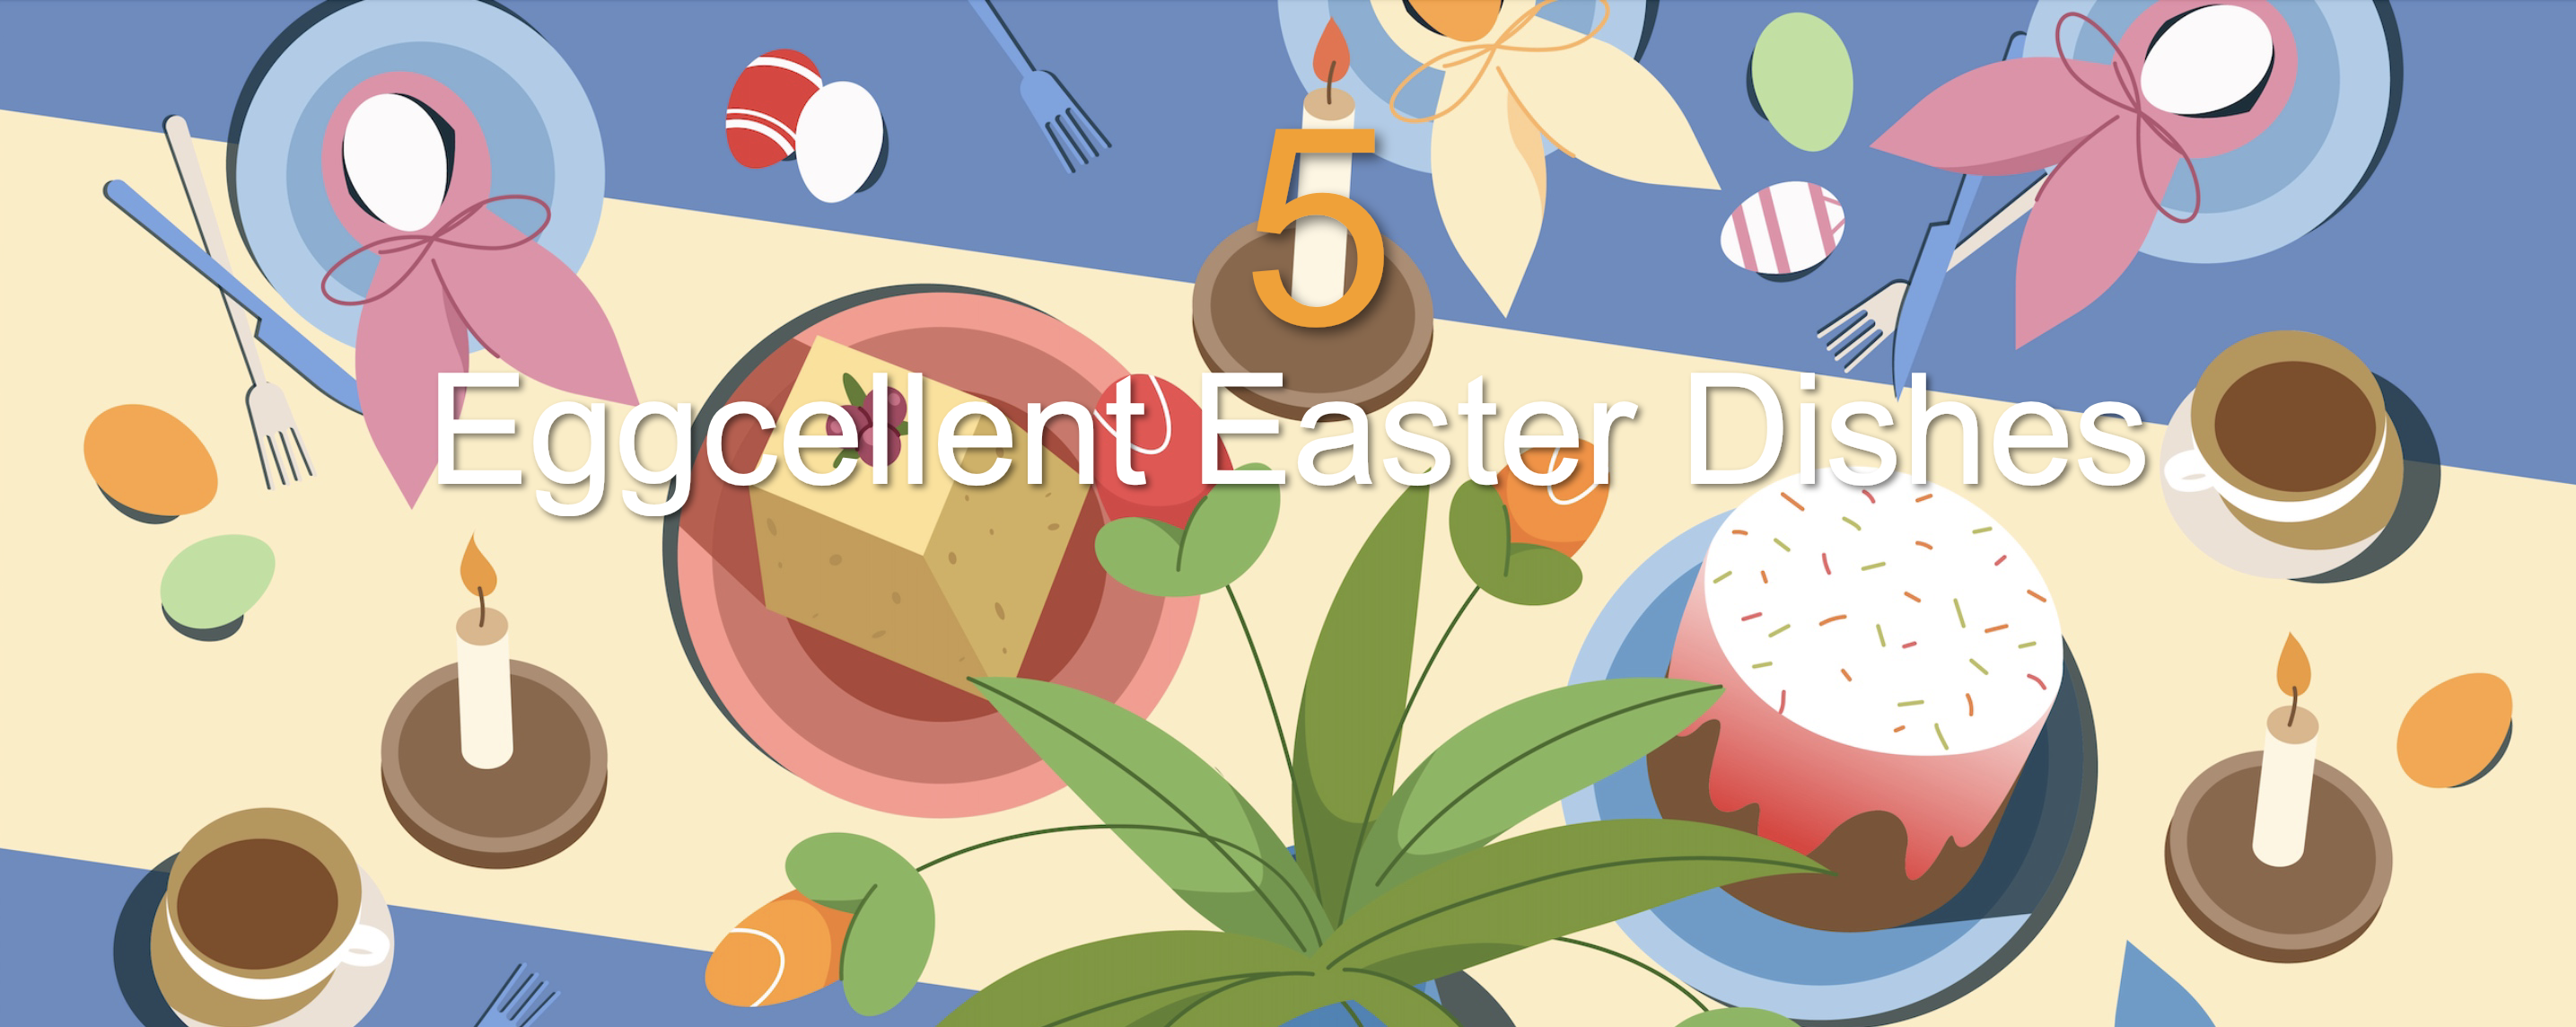 5 EGGciting Easter Dishes to help Your Restaurant Attract More Customers during the Easter Holidays!